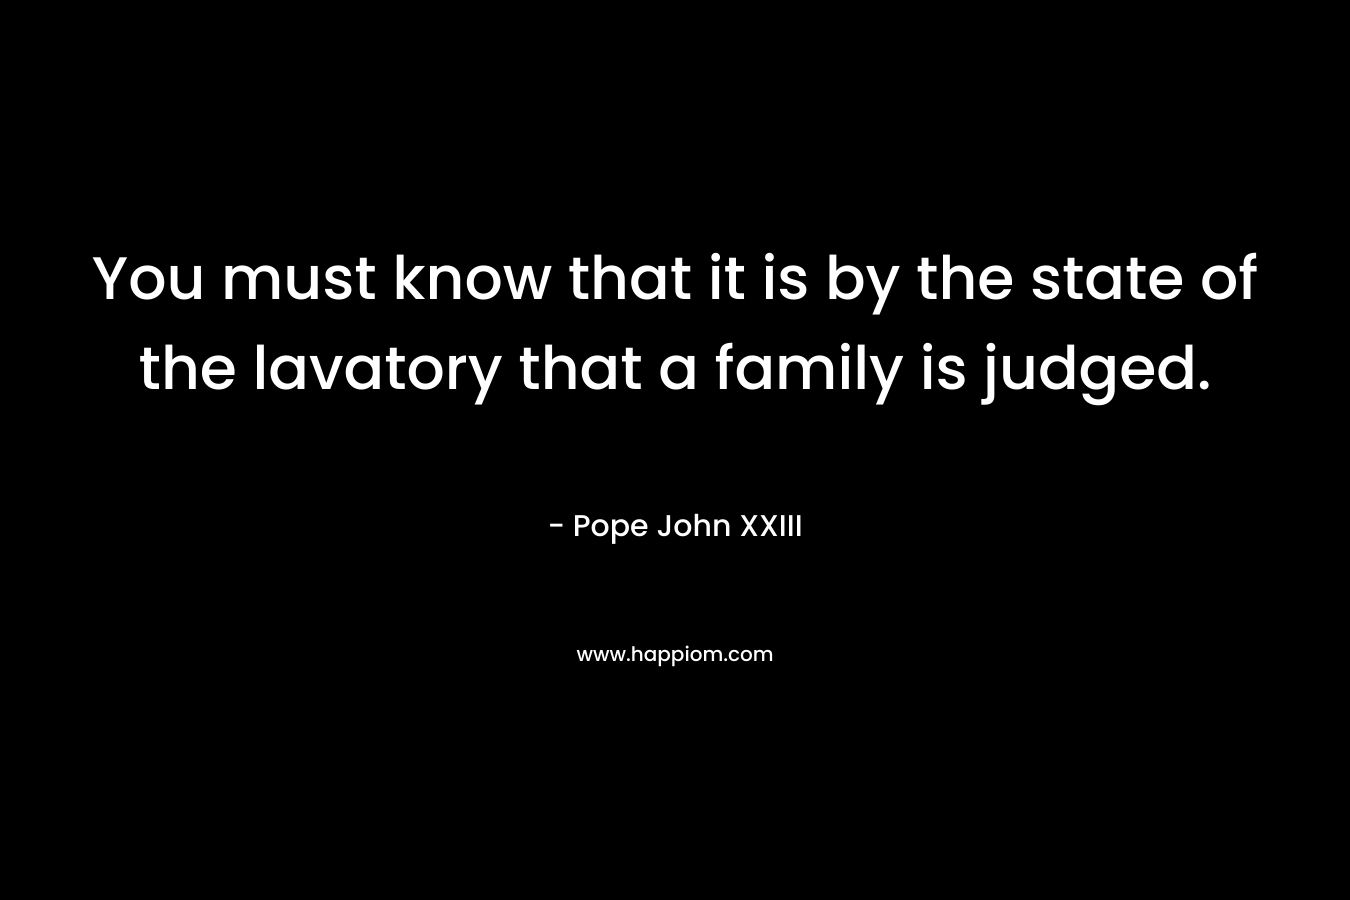 You must know that it is by the state of the lavatory that a family is judged.